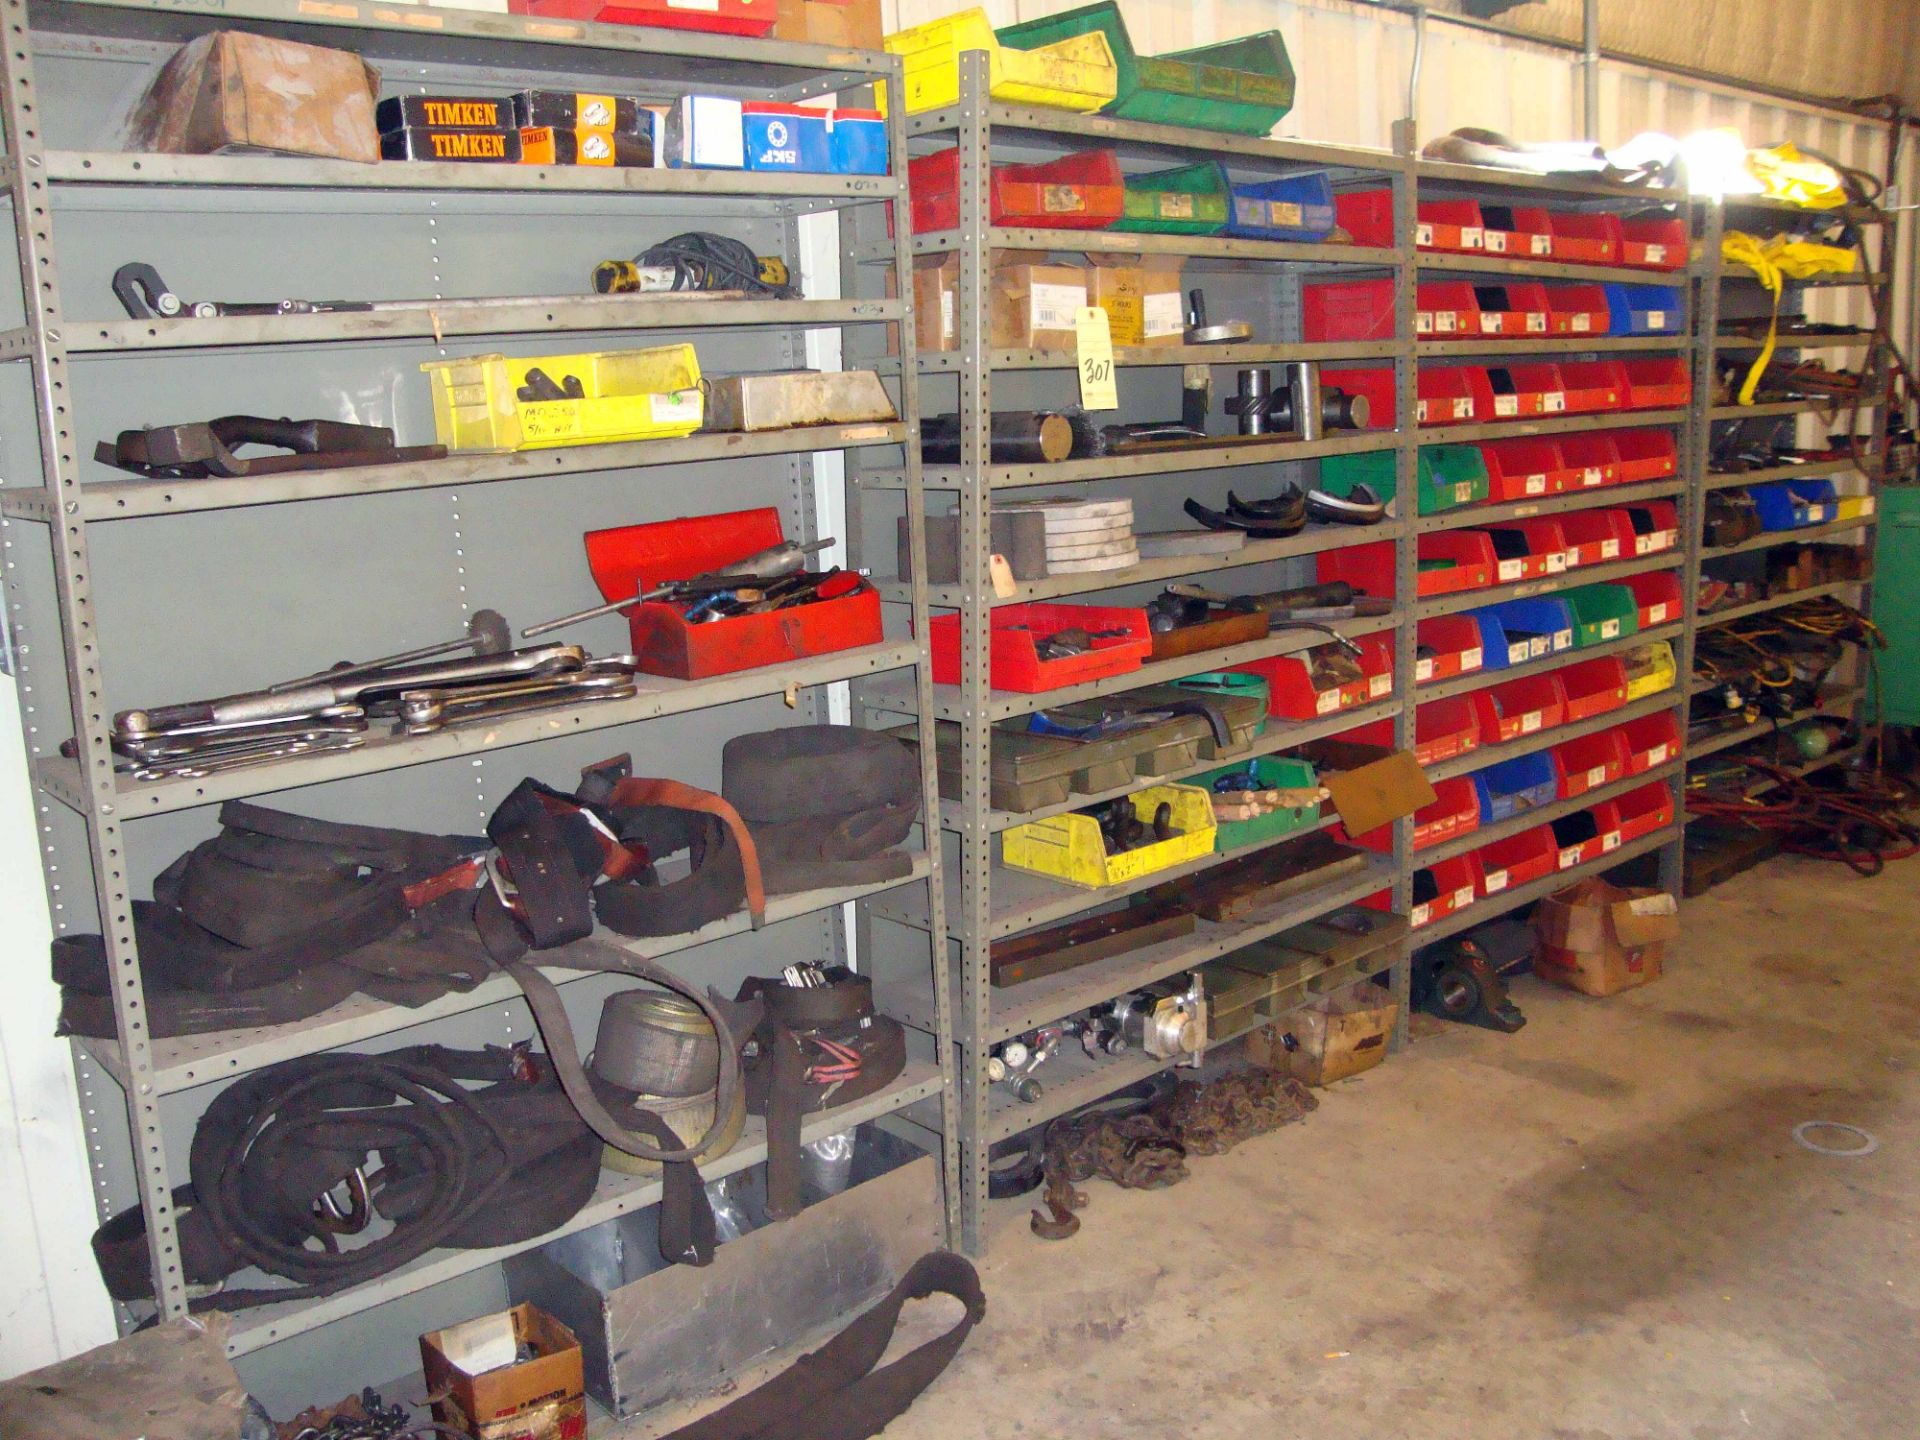 LOT OF STEEL SHELF SECTIONS (4), w/tooling, safety equipment, supplies, etc.